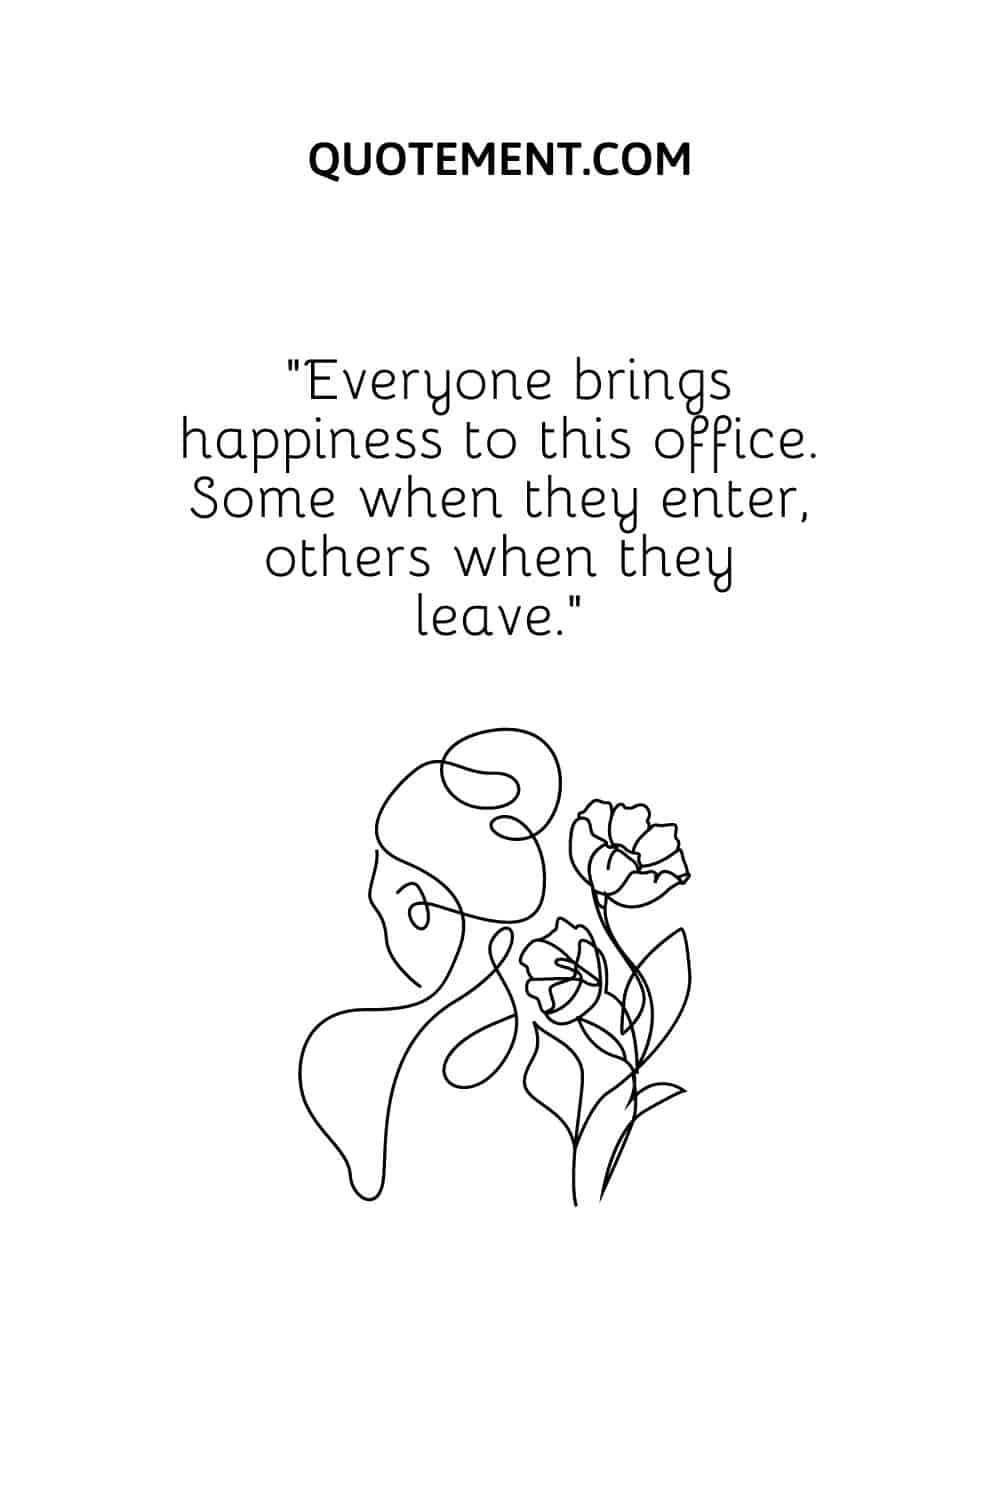 Everyone brings happiness to this office. Some when they enter, others when they leave